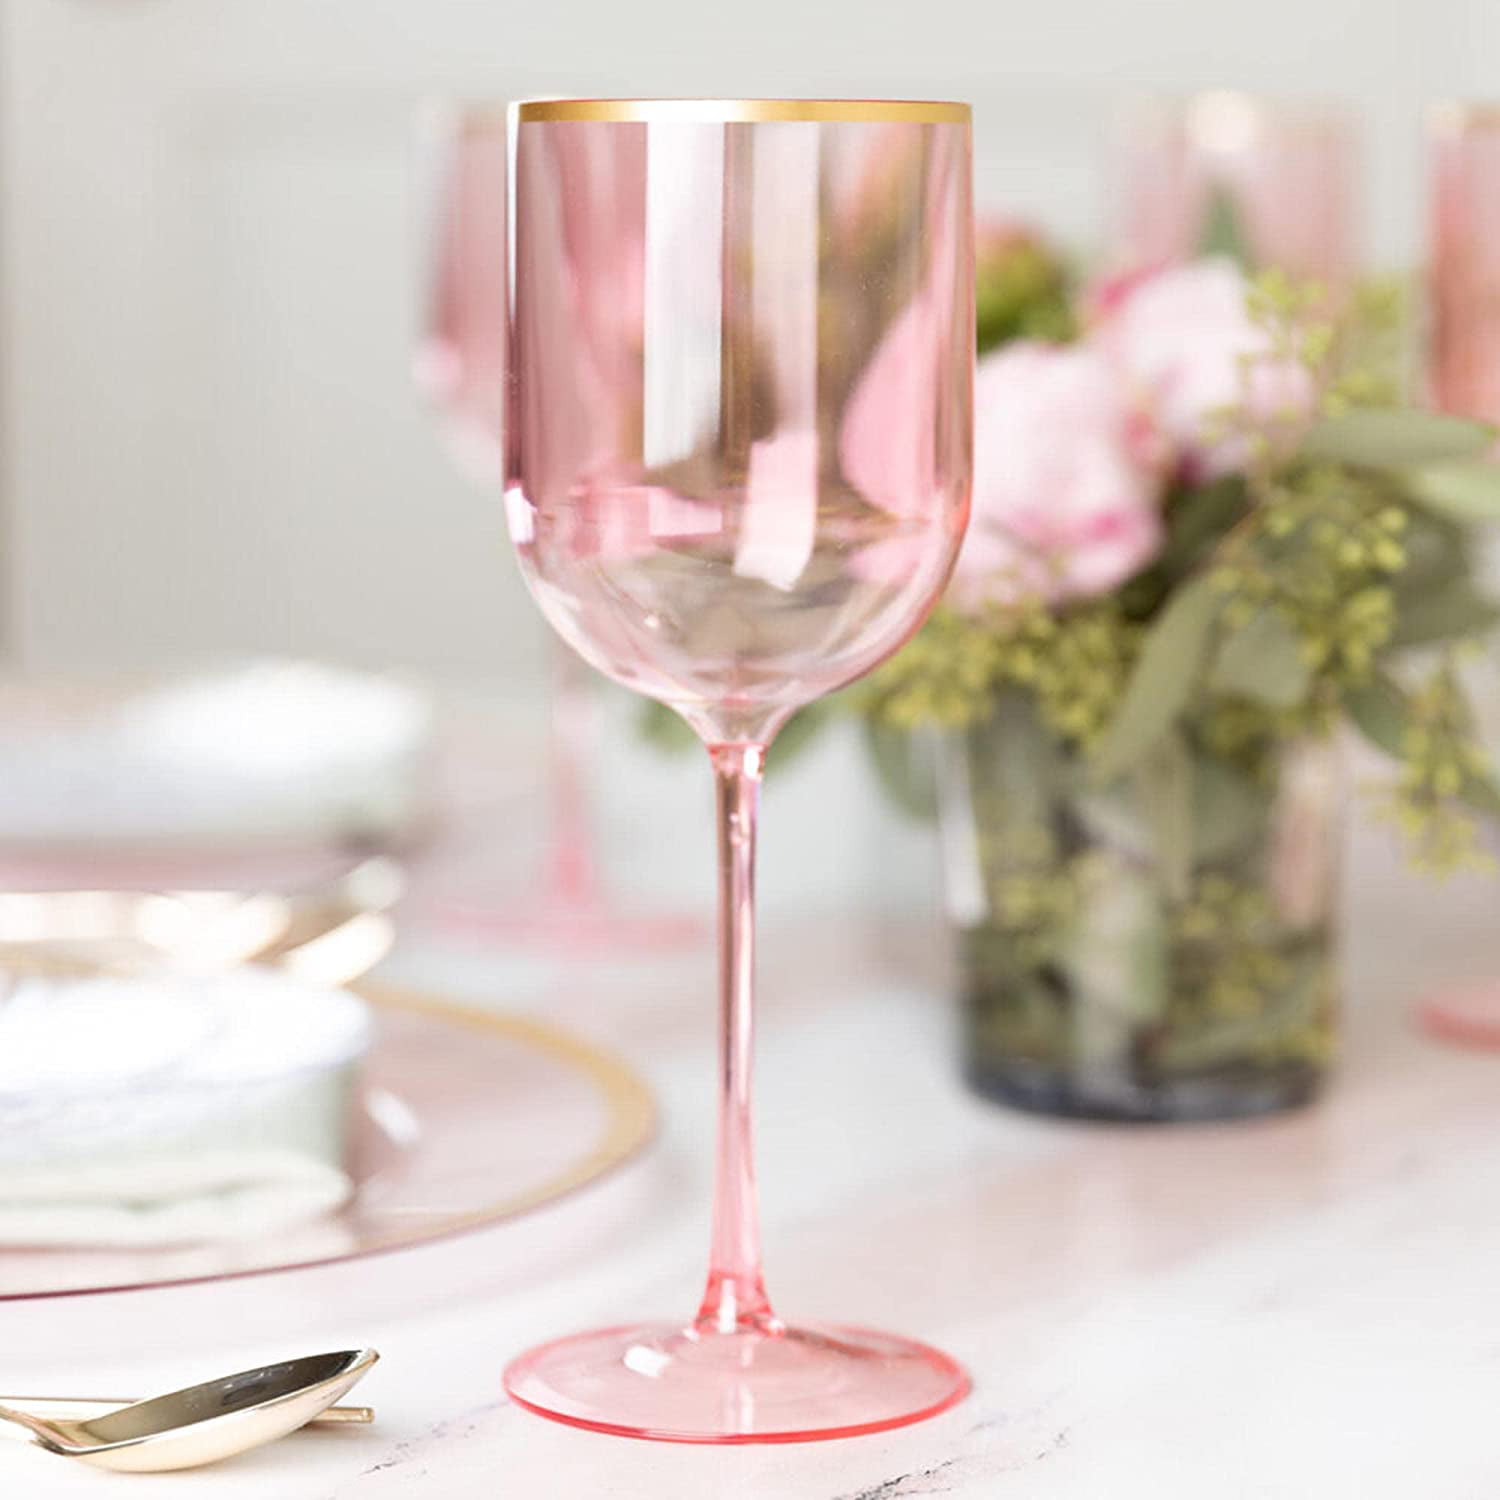 Lidy Unique Wine Glasses Set of 2-15.2oz Pink Wine Glasses | Gifts for Wine  Lovers & Wine Accessorie…See more Lidy Unique Wine Glasses Set of 2-15.2oz